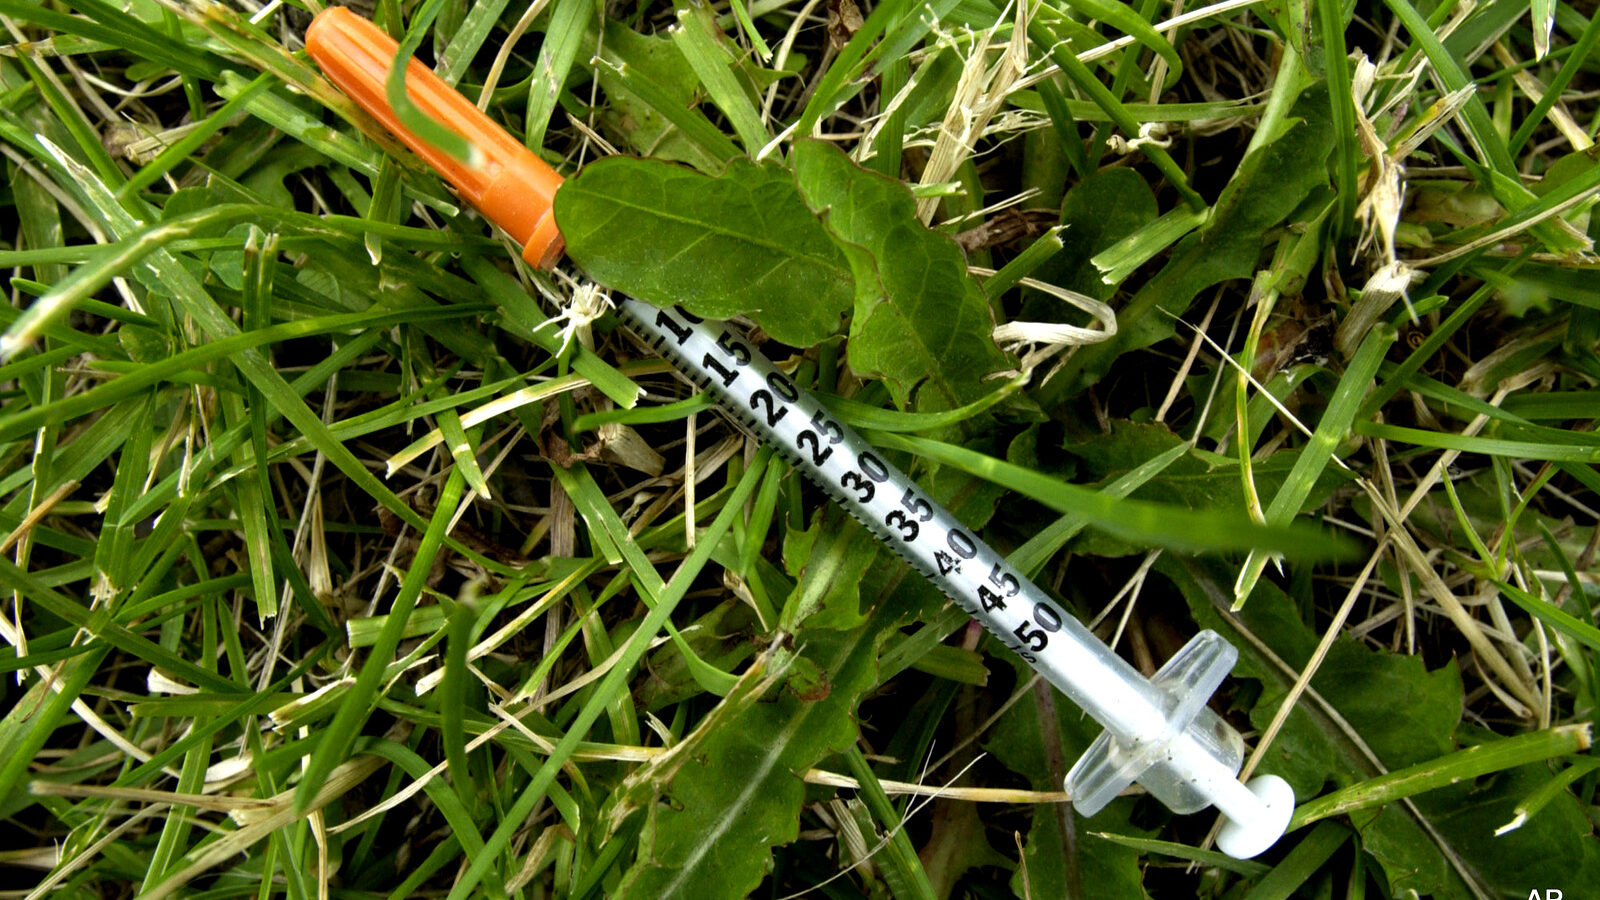 A syringe lies in the grass on a playing field near Charlestown High School, in the Charlestown neighborhood of Boston.